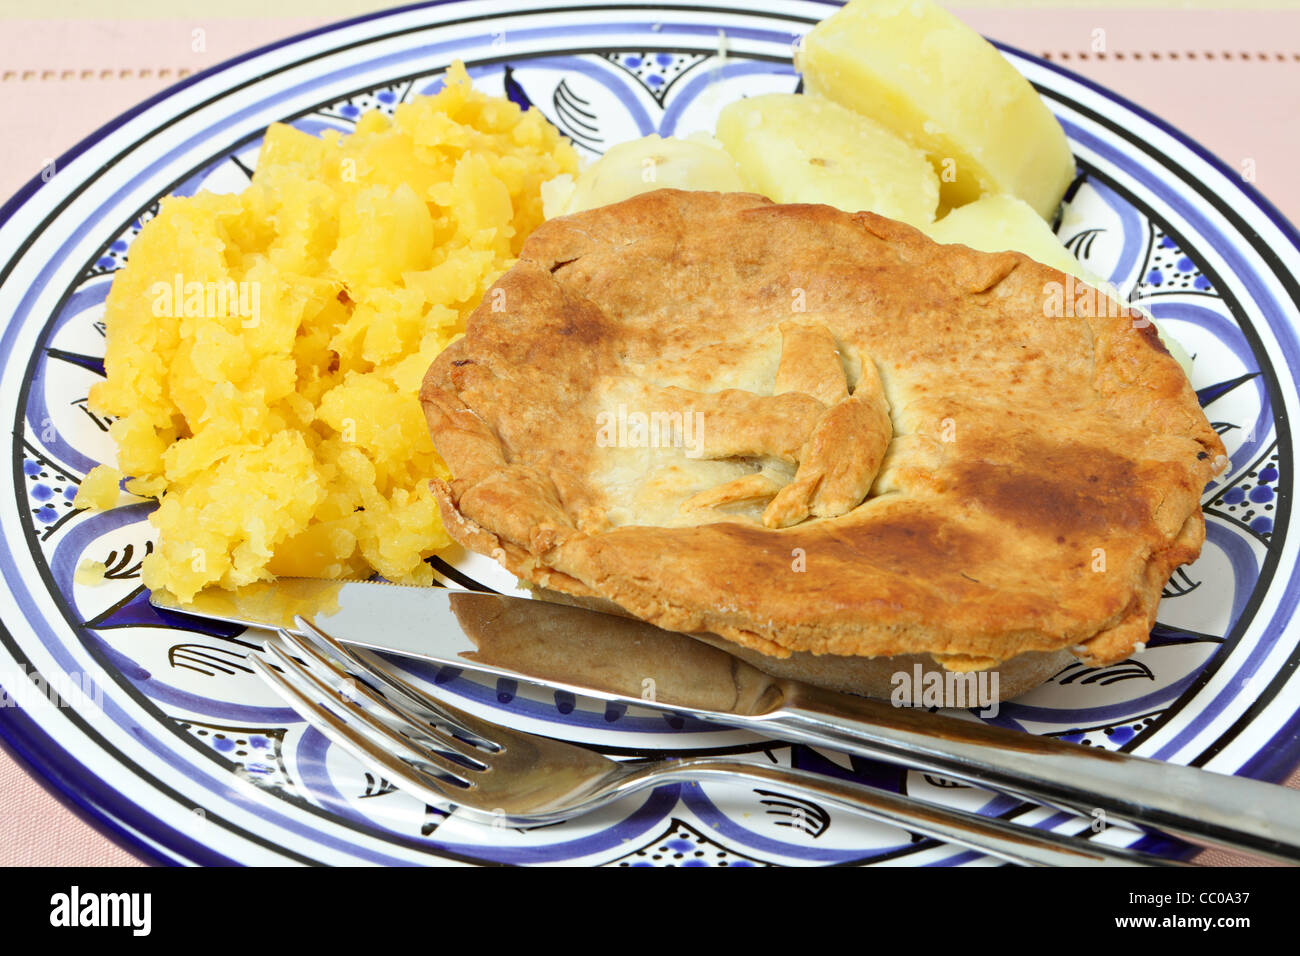 A homemade pie with swede (rutabaga) and boiled potato Stock Photo